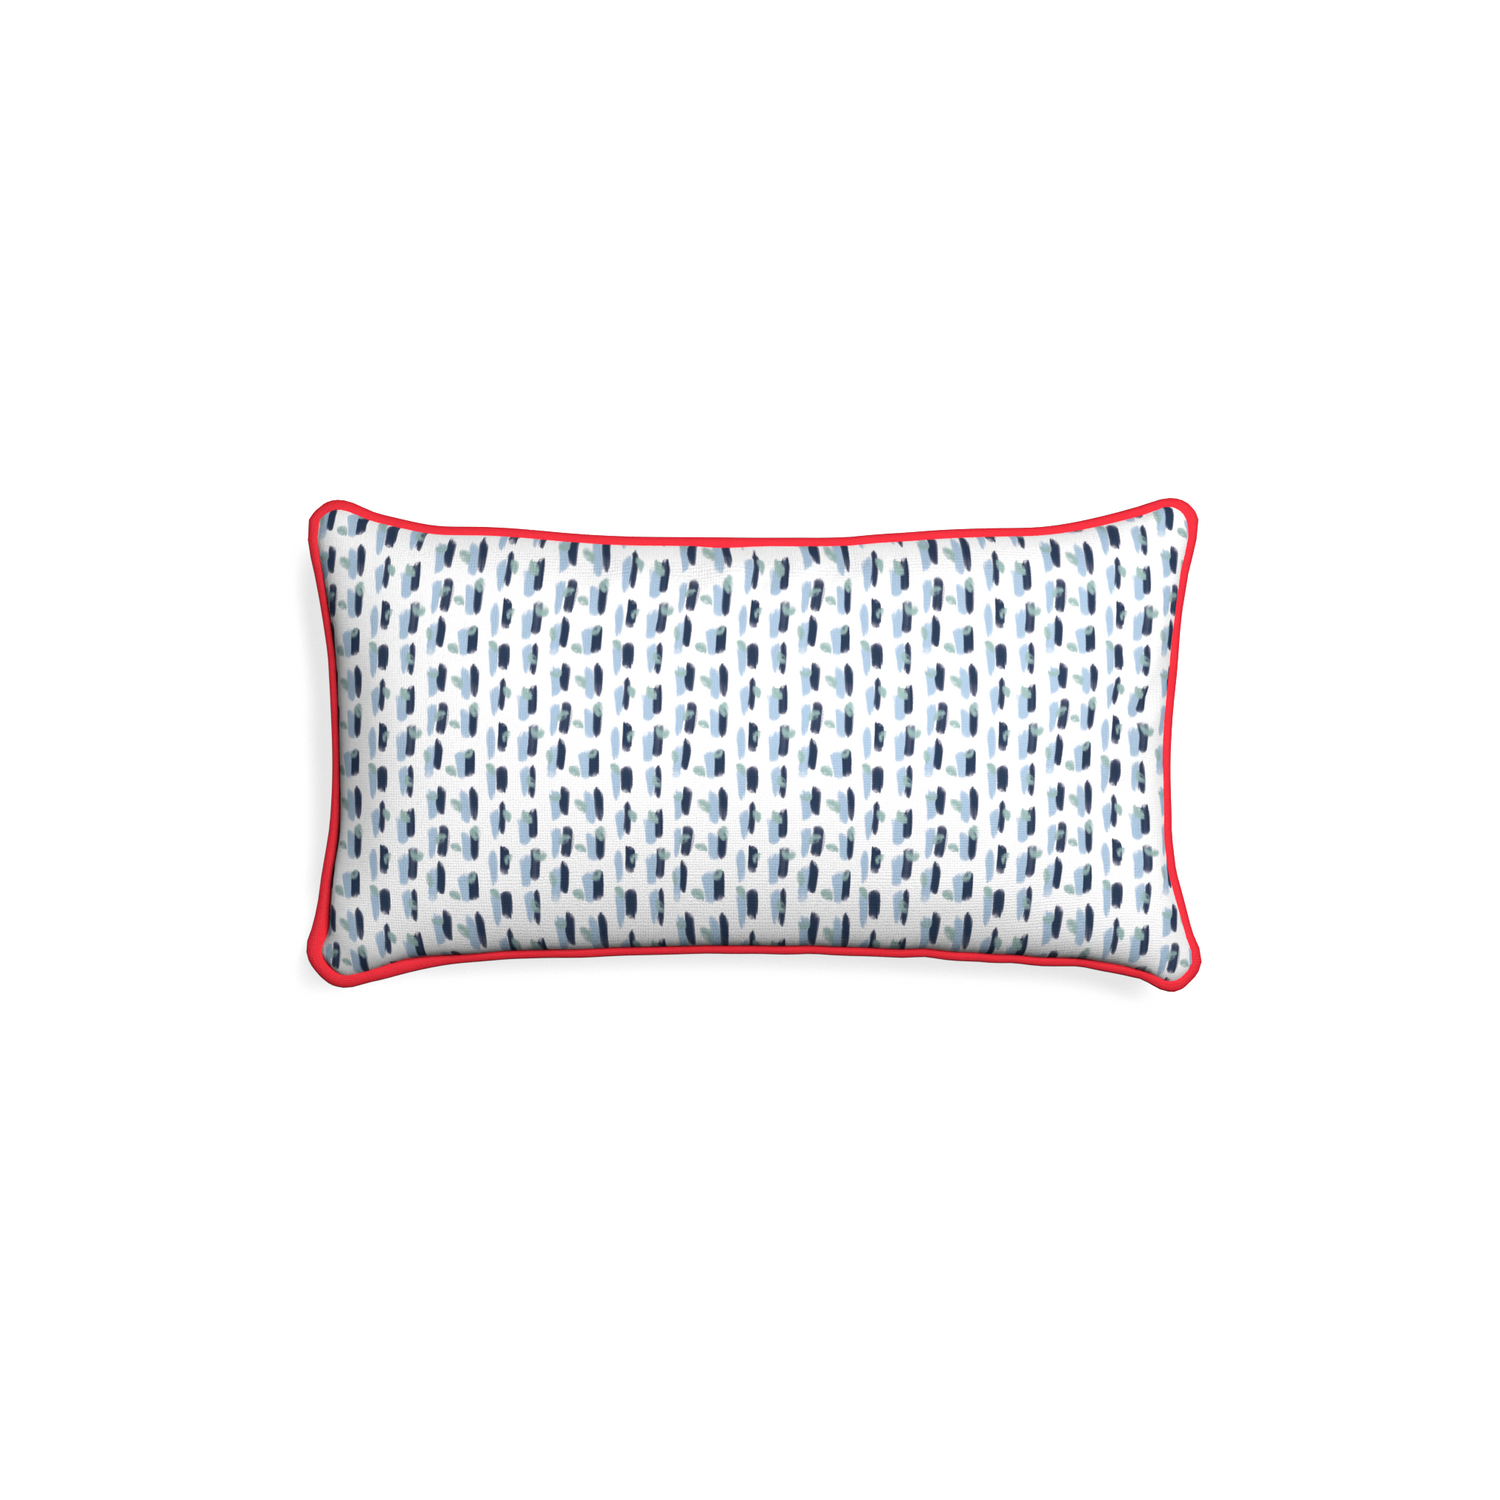 Petite-lumbar poppy custom blue and whitepillow with cherry piping on white background